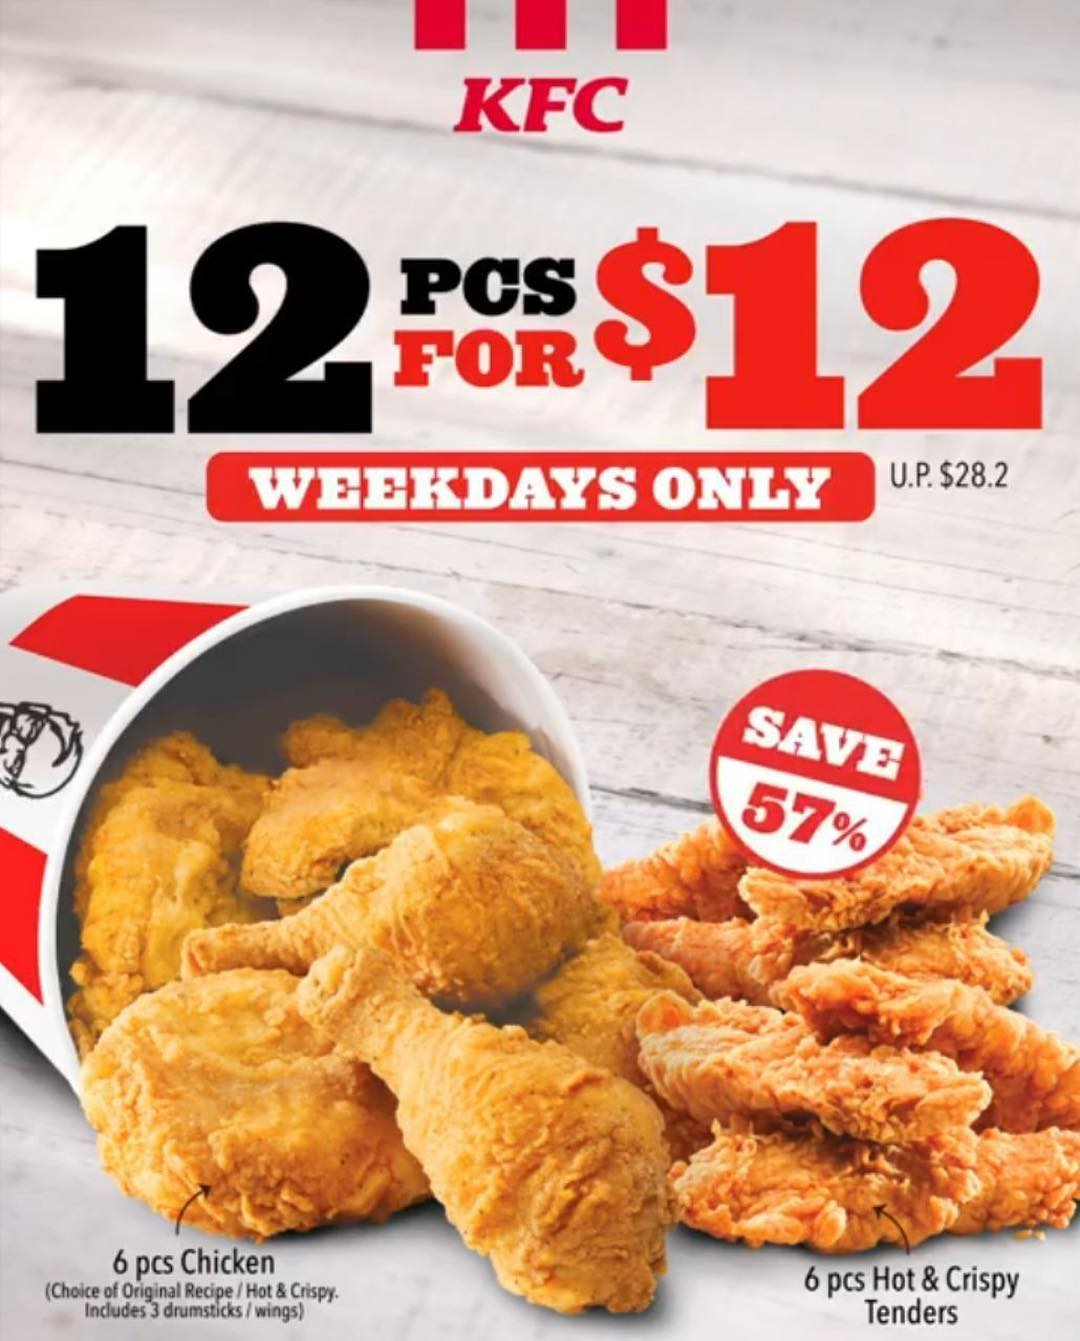 Get 12 Pieces Of KFC Fried Chicken For 12 On Weekdays EatBook.sg